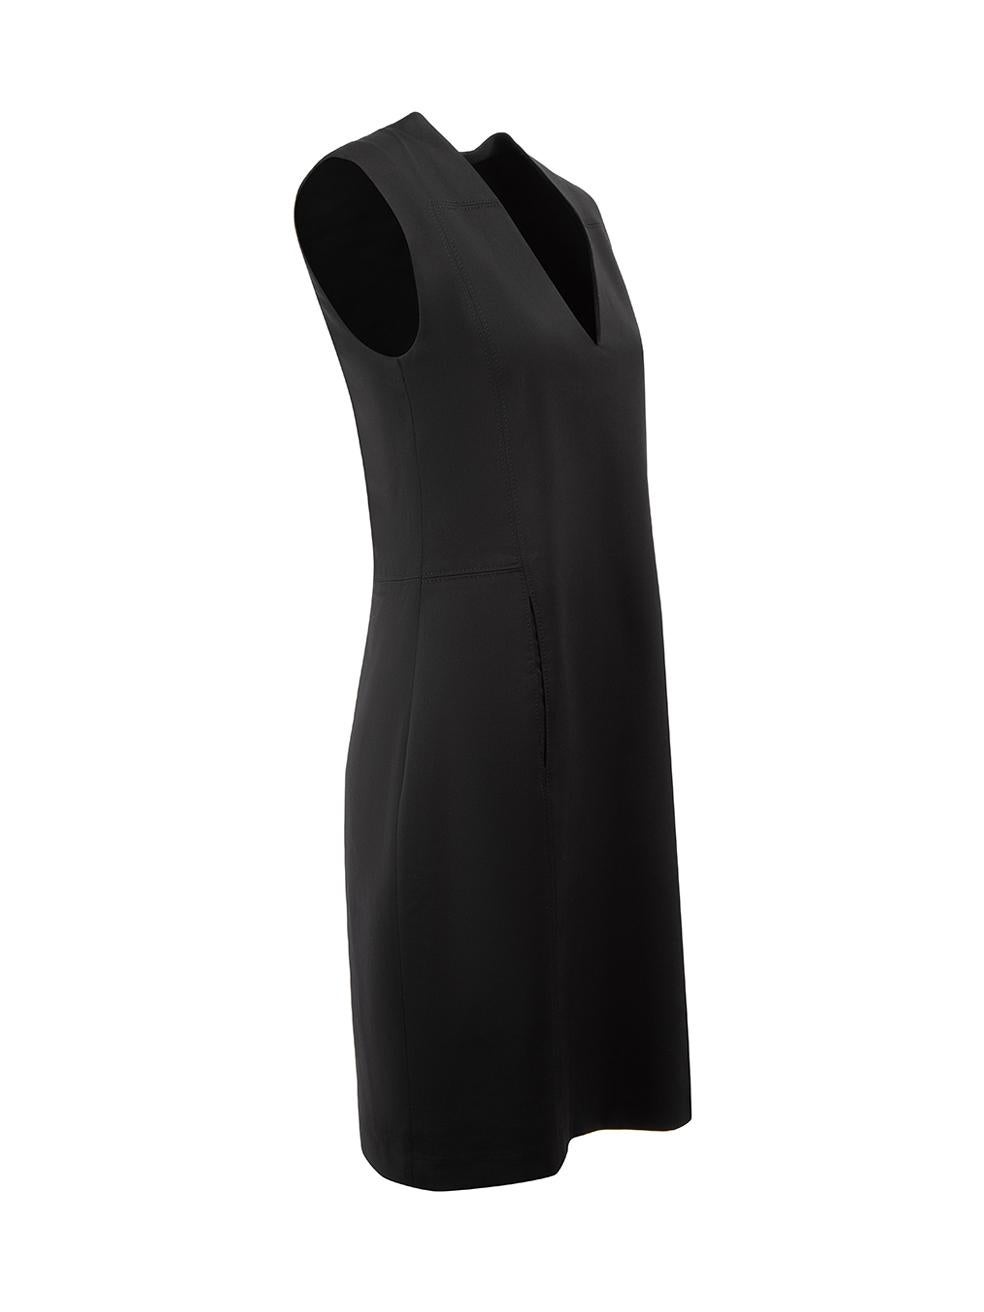 CONDITION is Very good. Hardly any visible wear to drink is evident on this used Helmut Lang designer resale item. 



Details


Black

Wool

Mini dress

V neckline

Sleeveless

2x Front pockets on skirt

Back zip closure





Made in